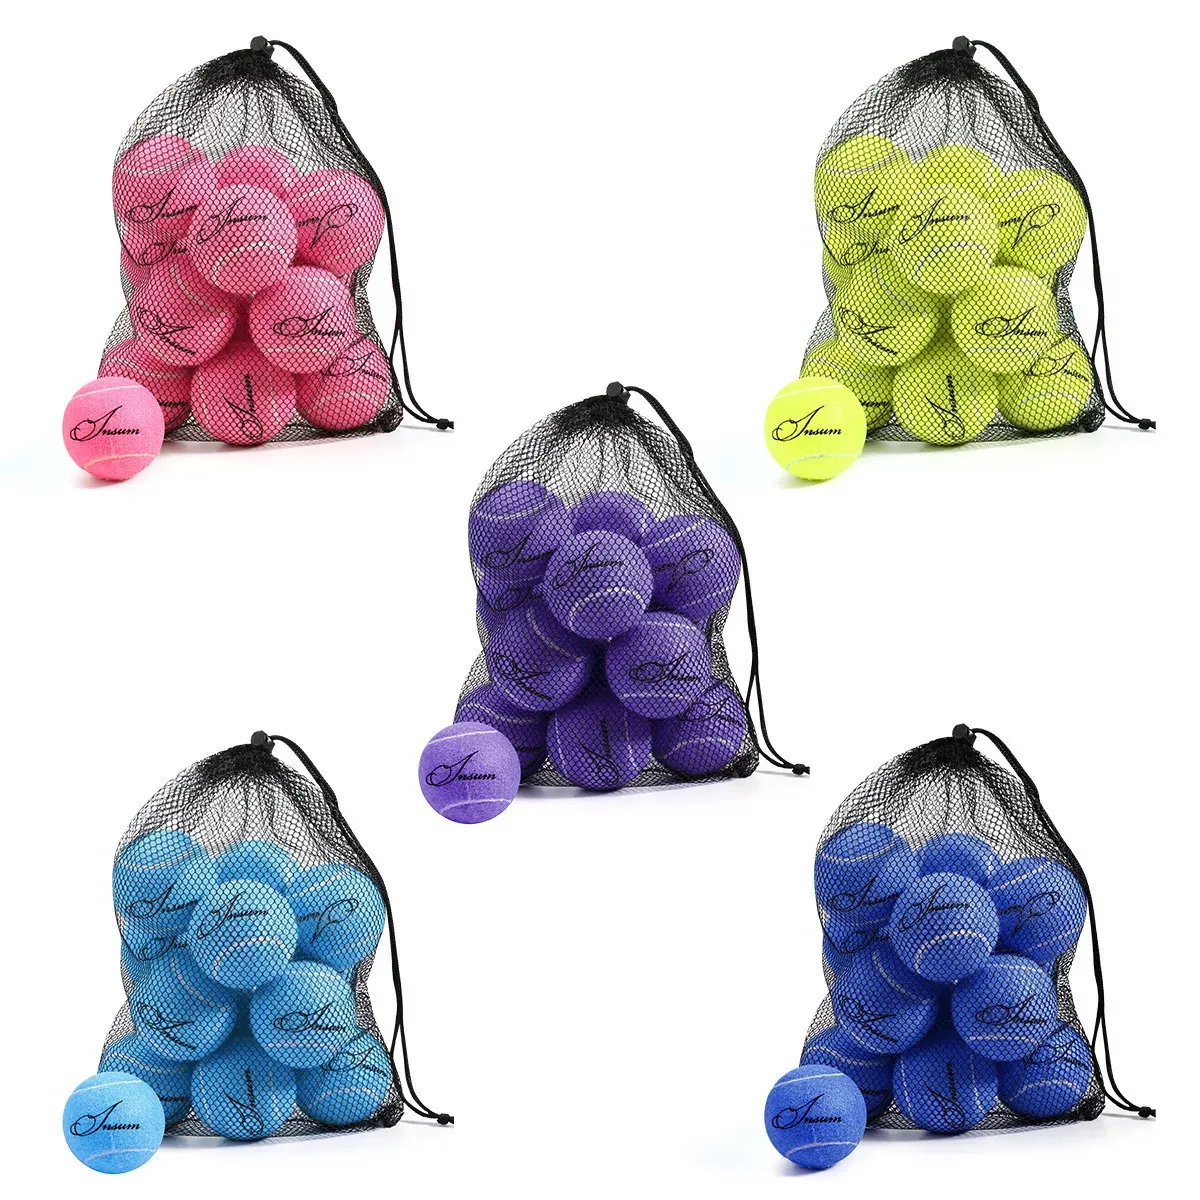 INSUM Tennis Balls 12pcs Mesh Bag for Easy Carry 4 Color Options Dog Pet Toy and Beginner Training 240124